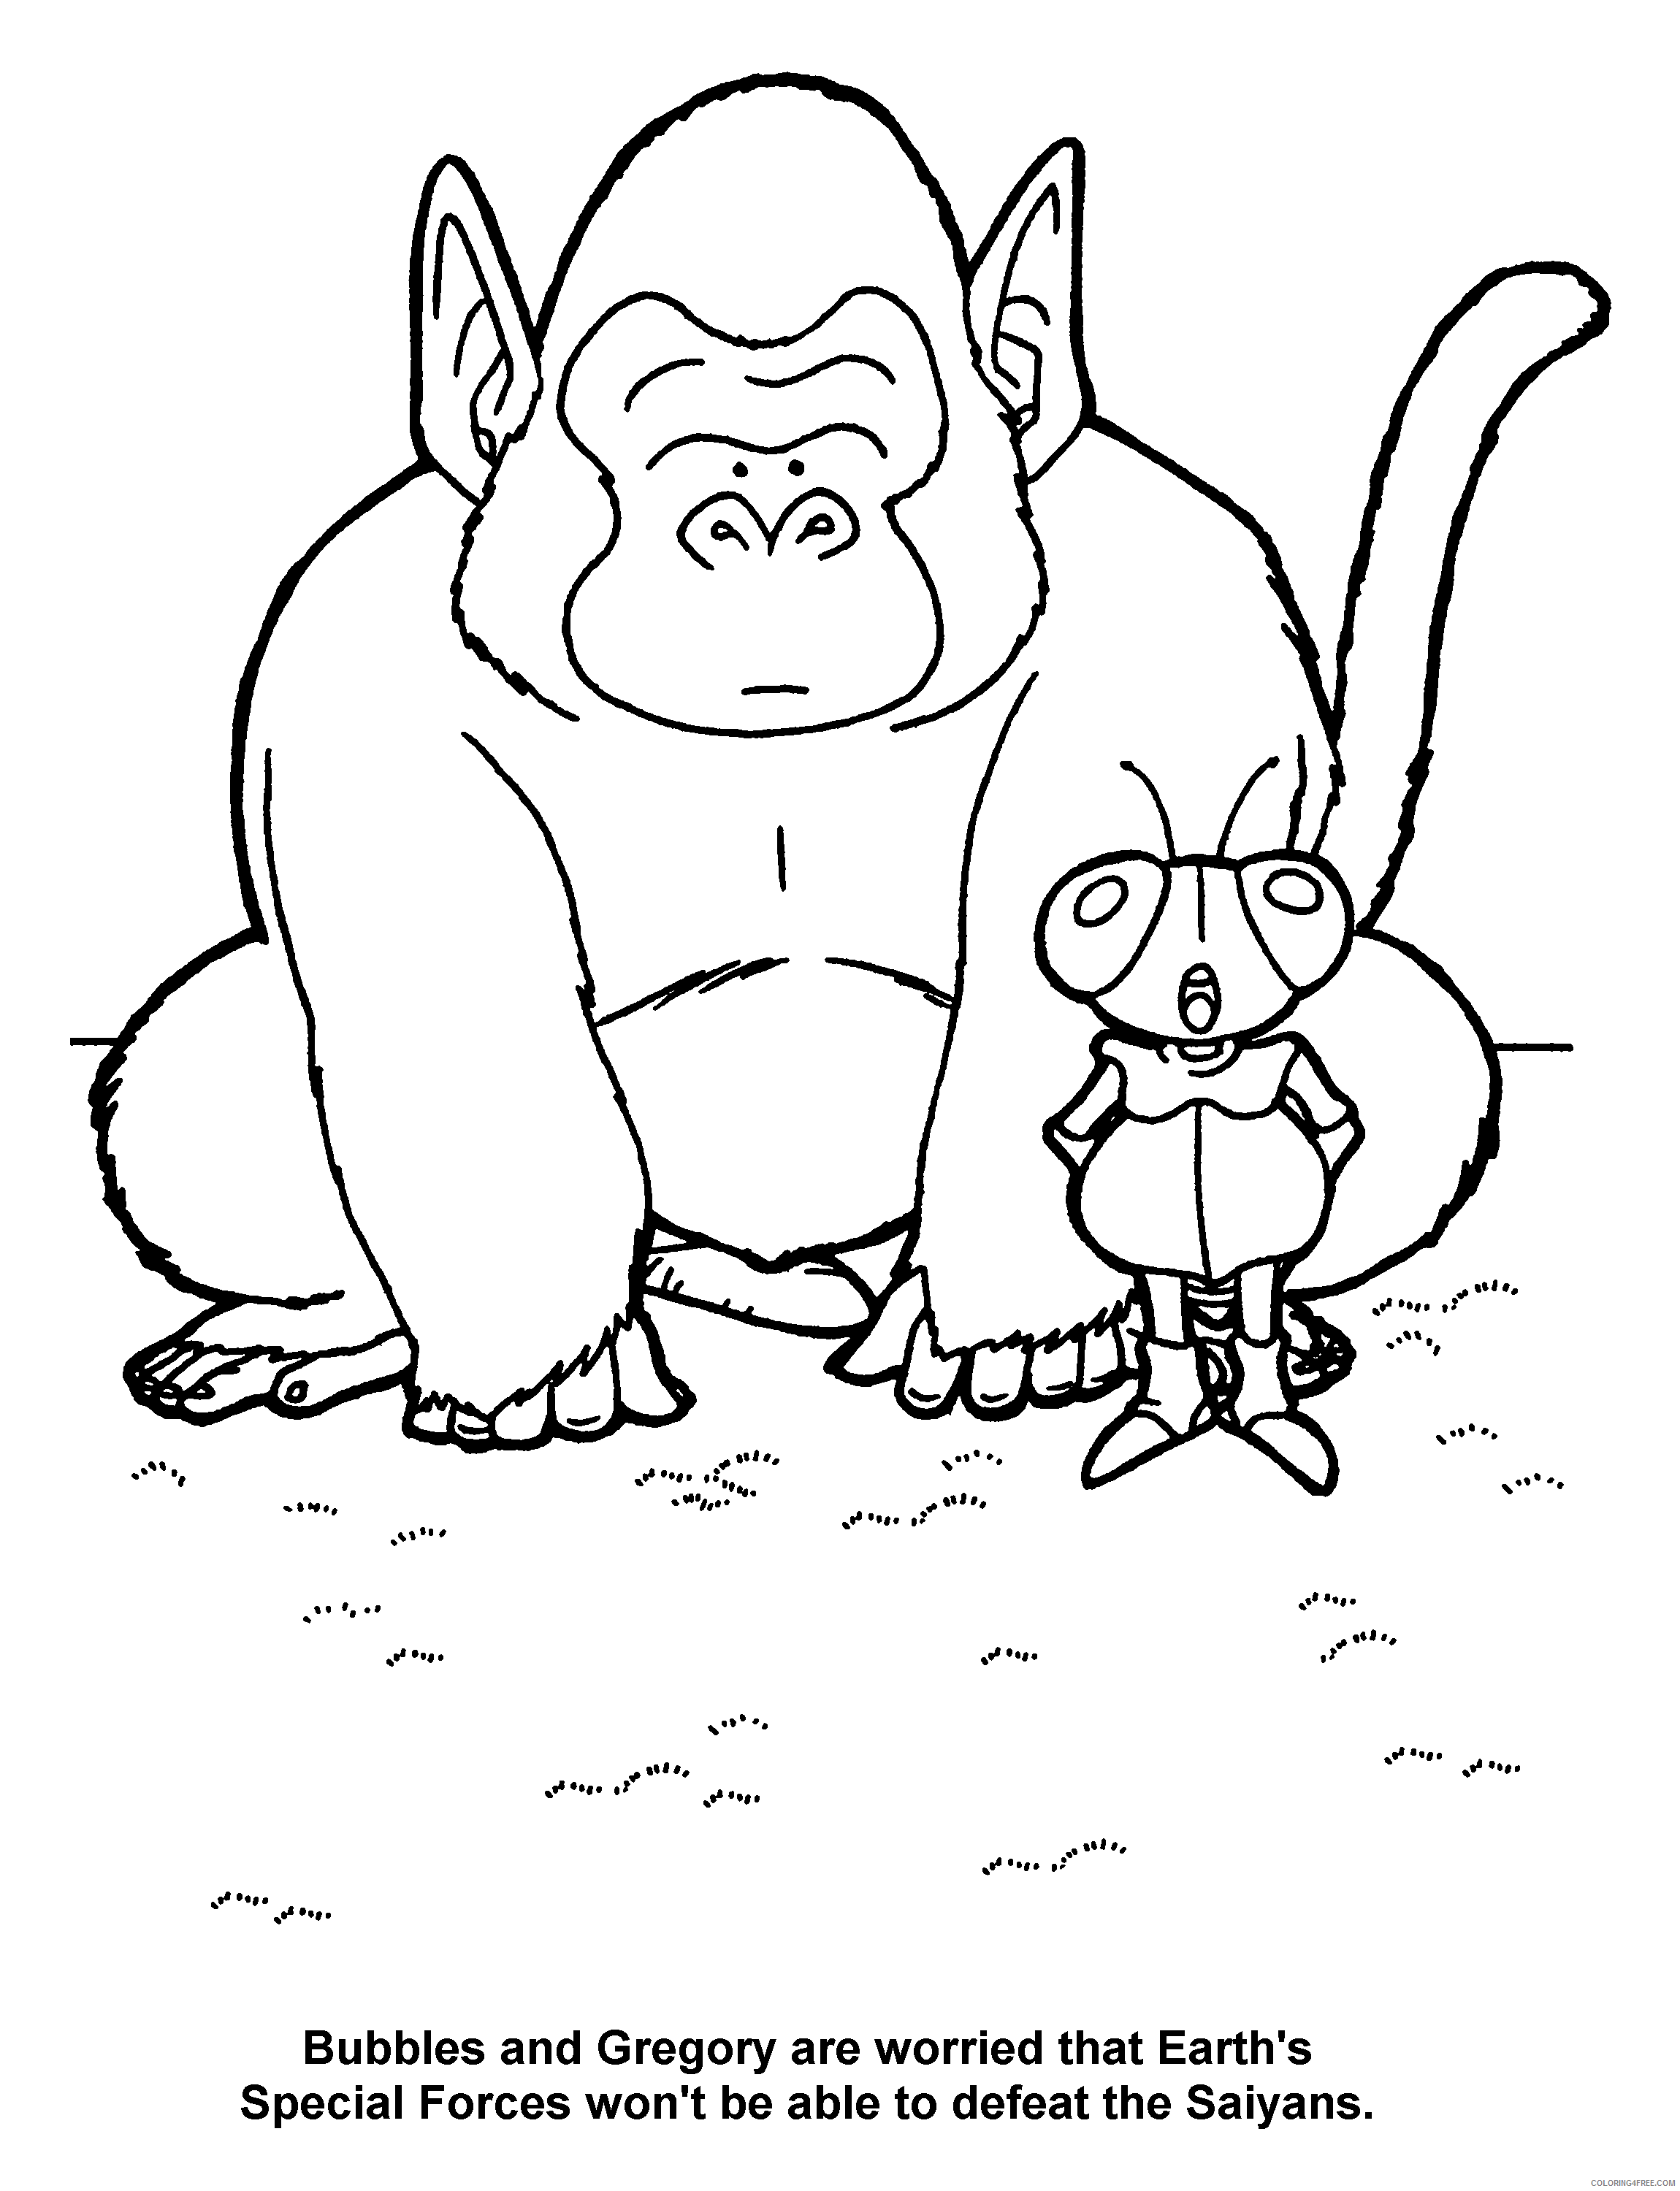 023 dragon ball z bubbles and gregory worried Printable Coloring4free